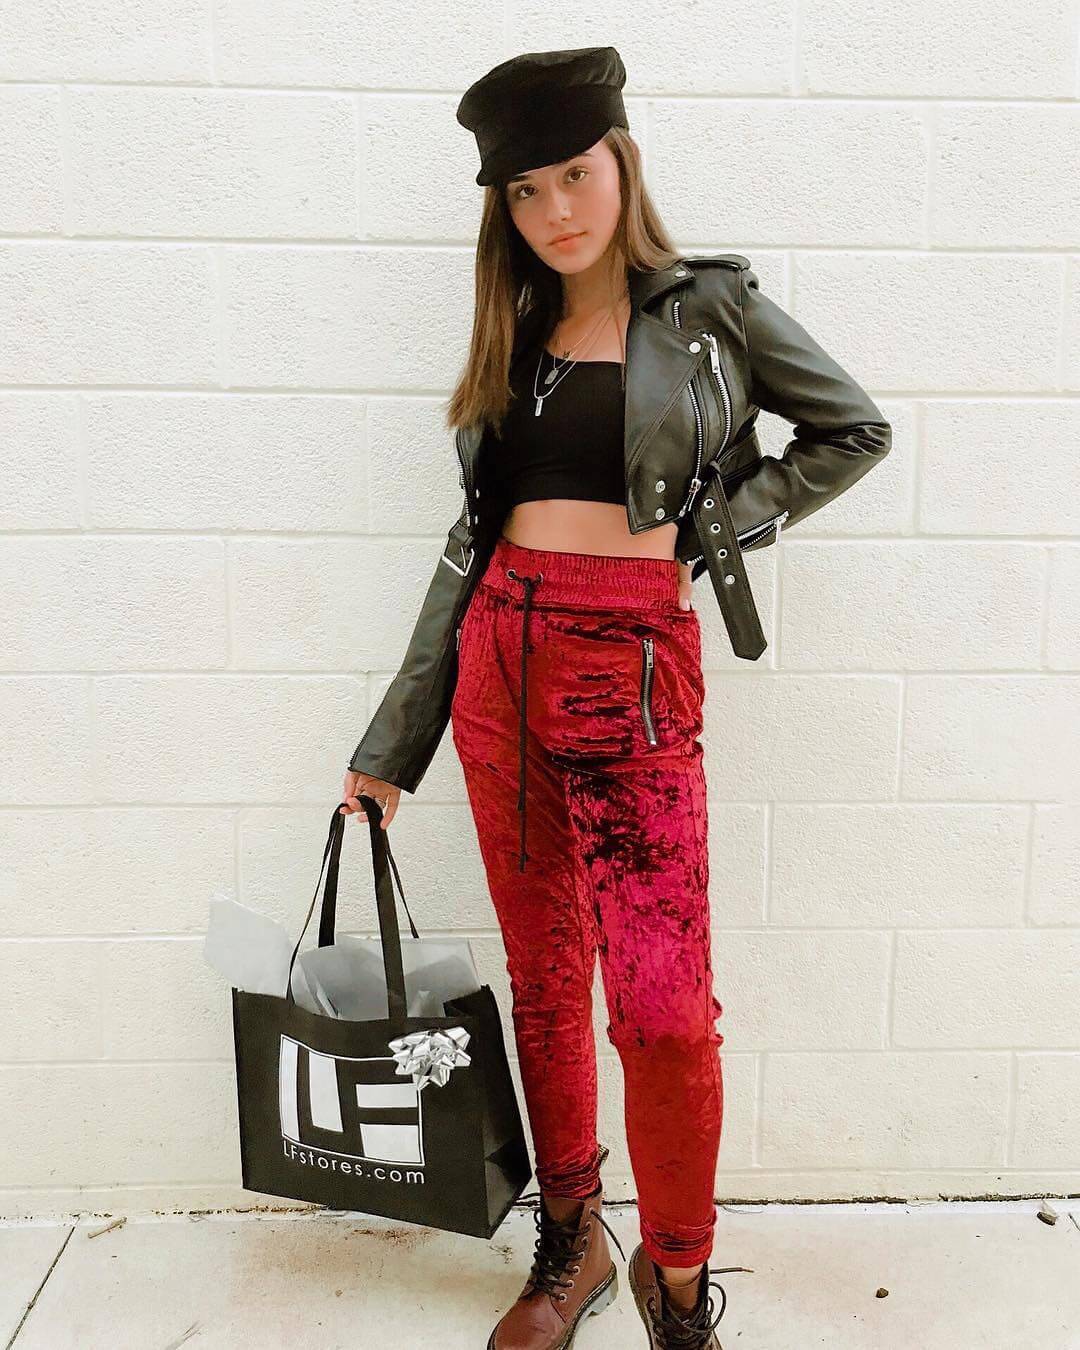 Makayla Storms In Black Crop Top and Velvet Trousers With Jacket